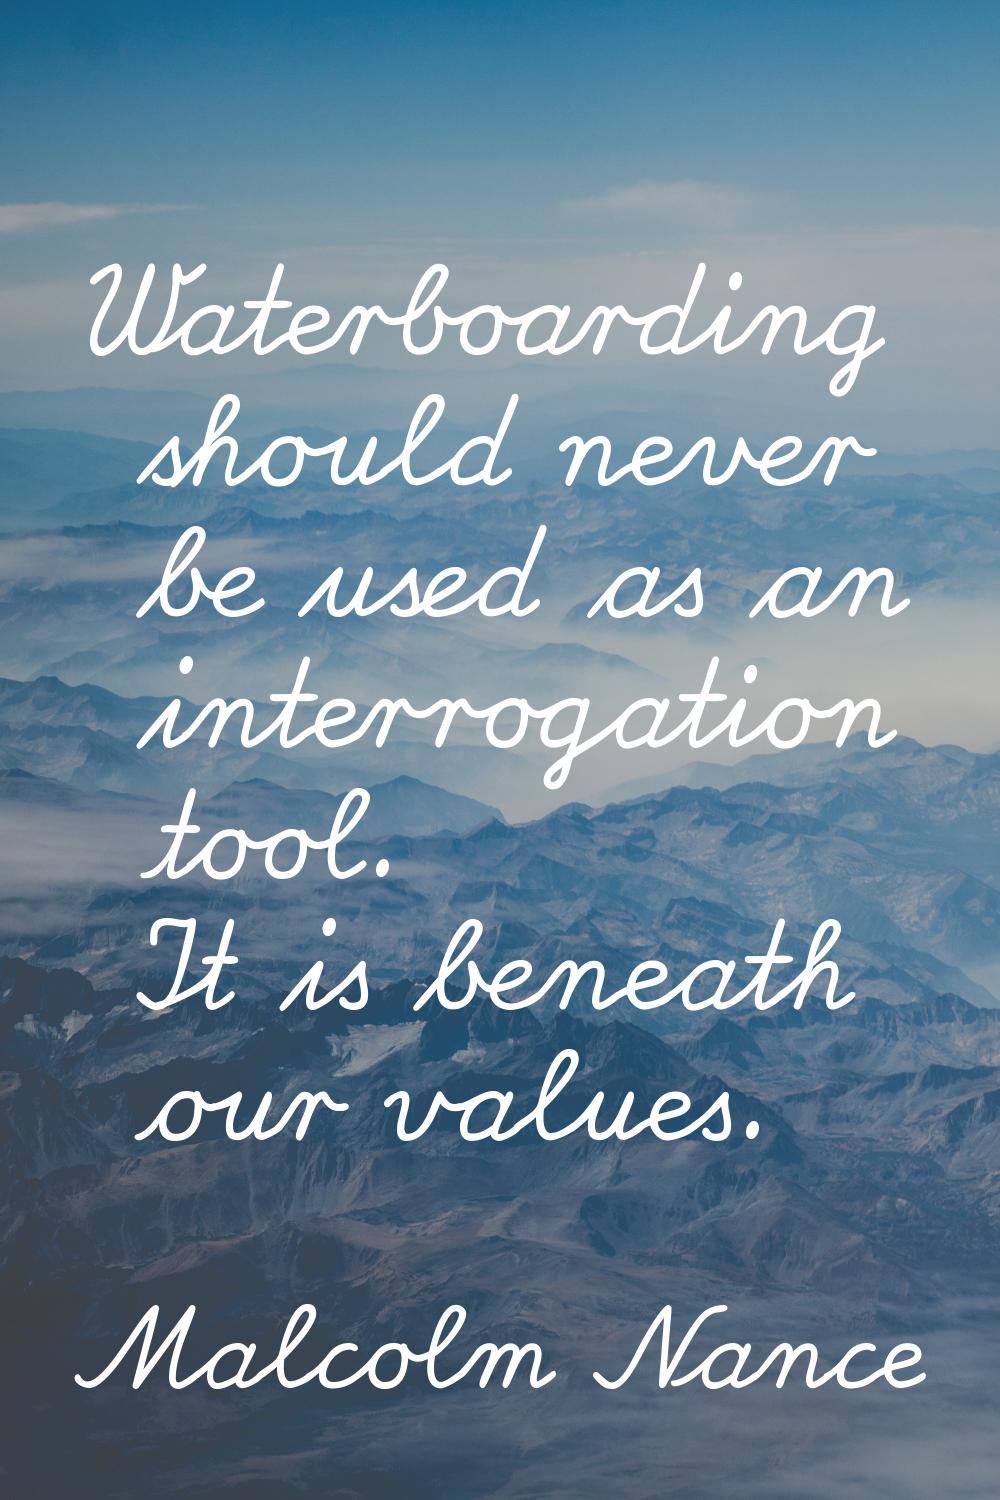 Waterboarding should never be used as an interrogation tool. It is beneath our values.